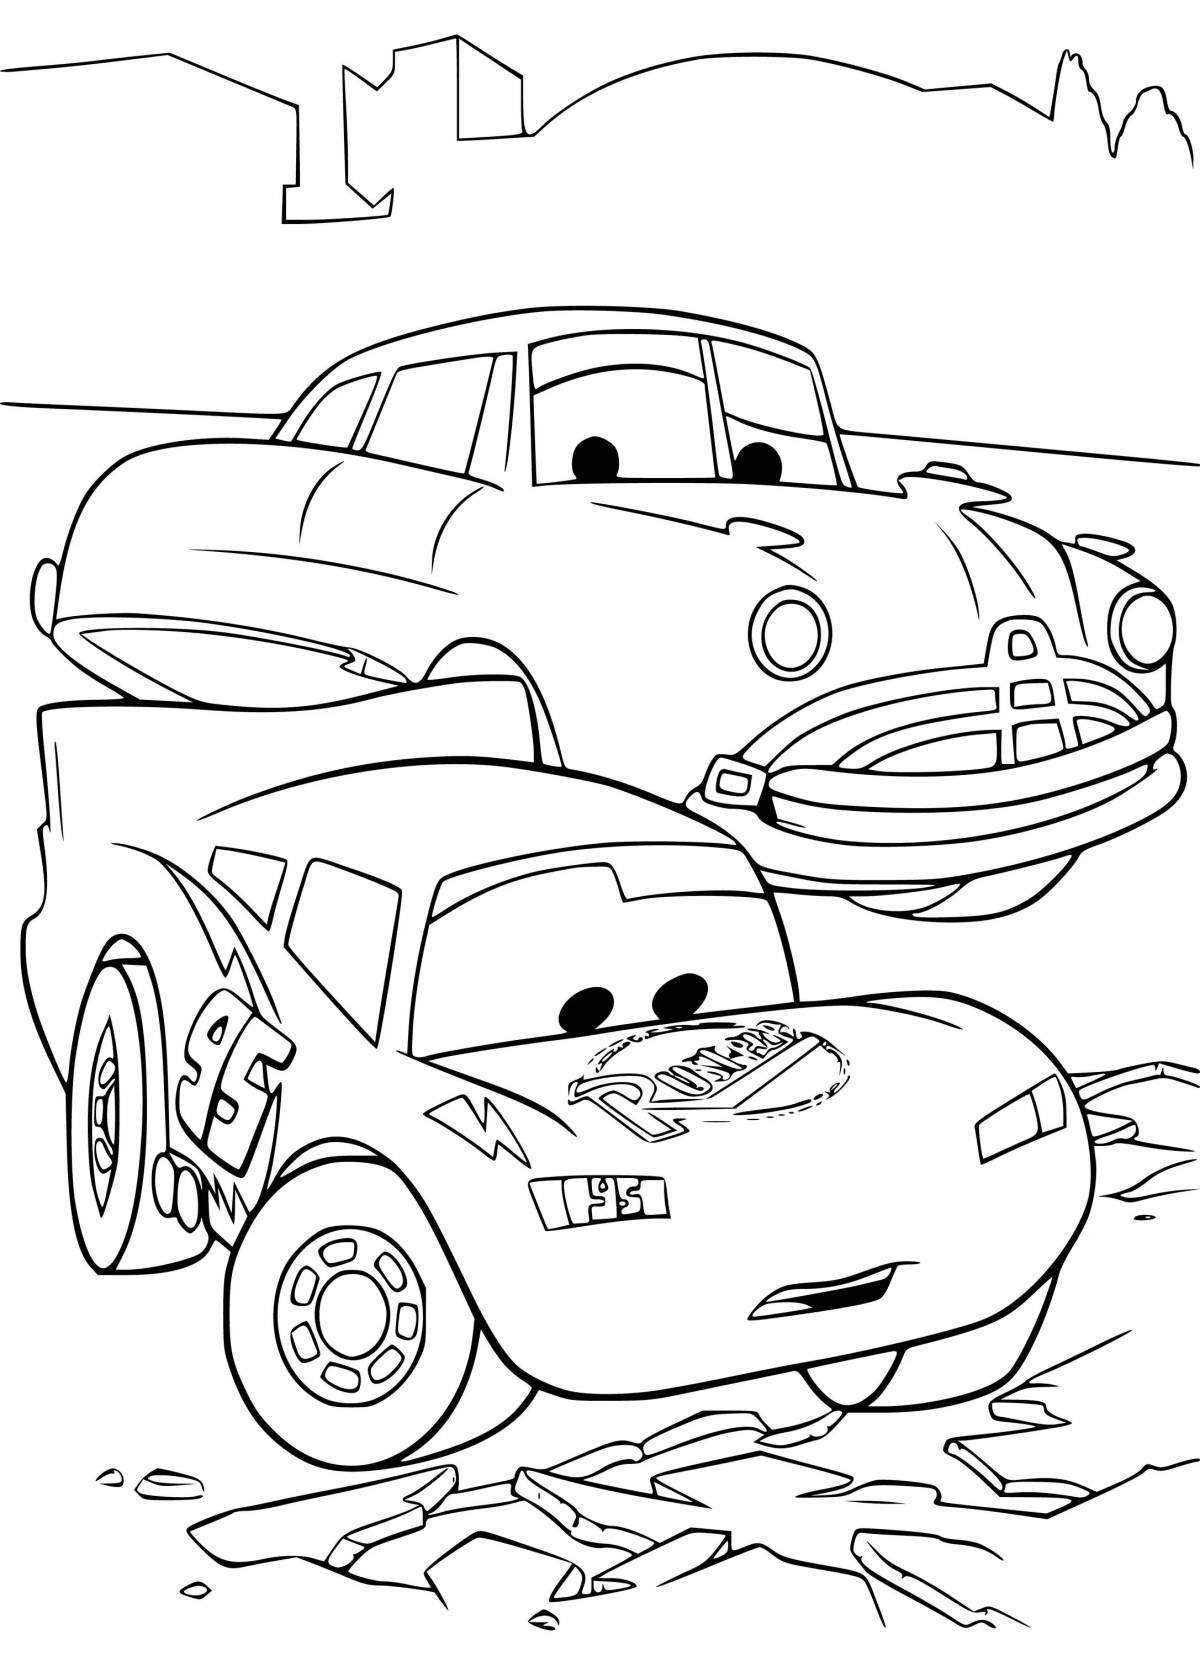 Coloring bright cars for children 6-7 years old